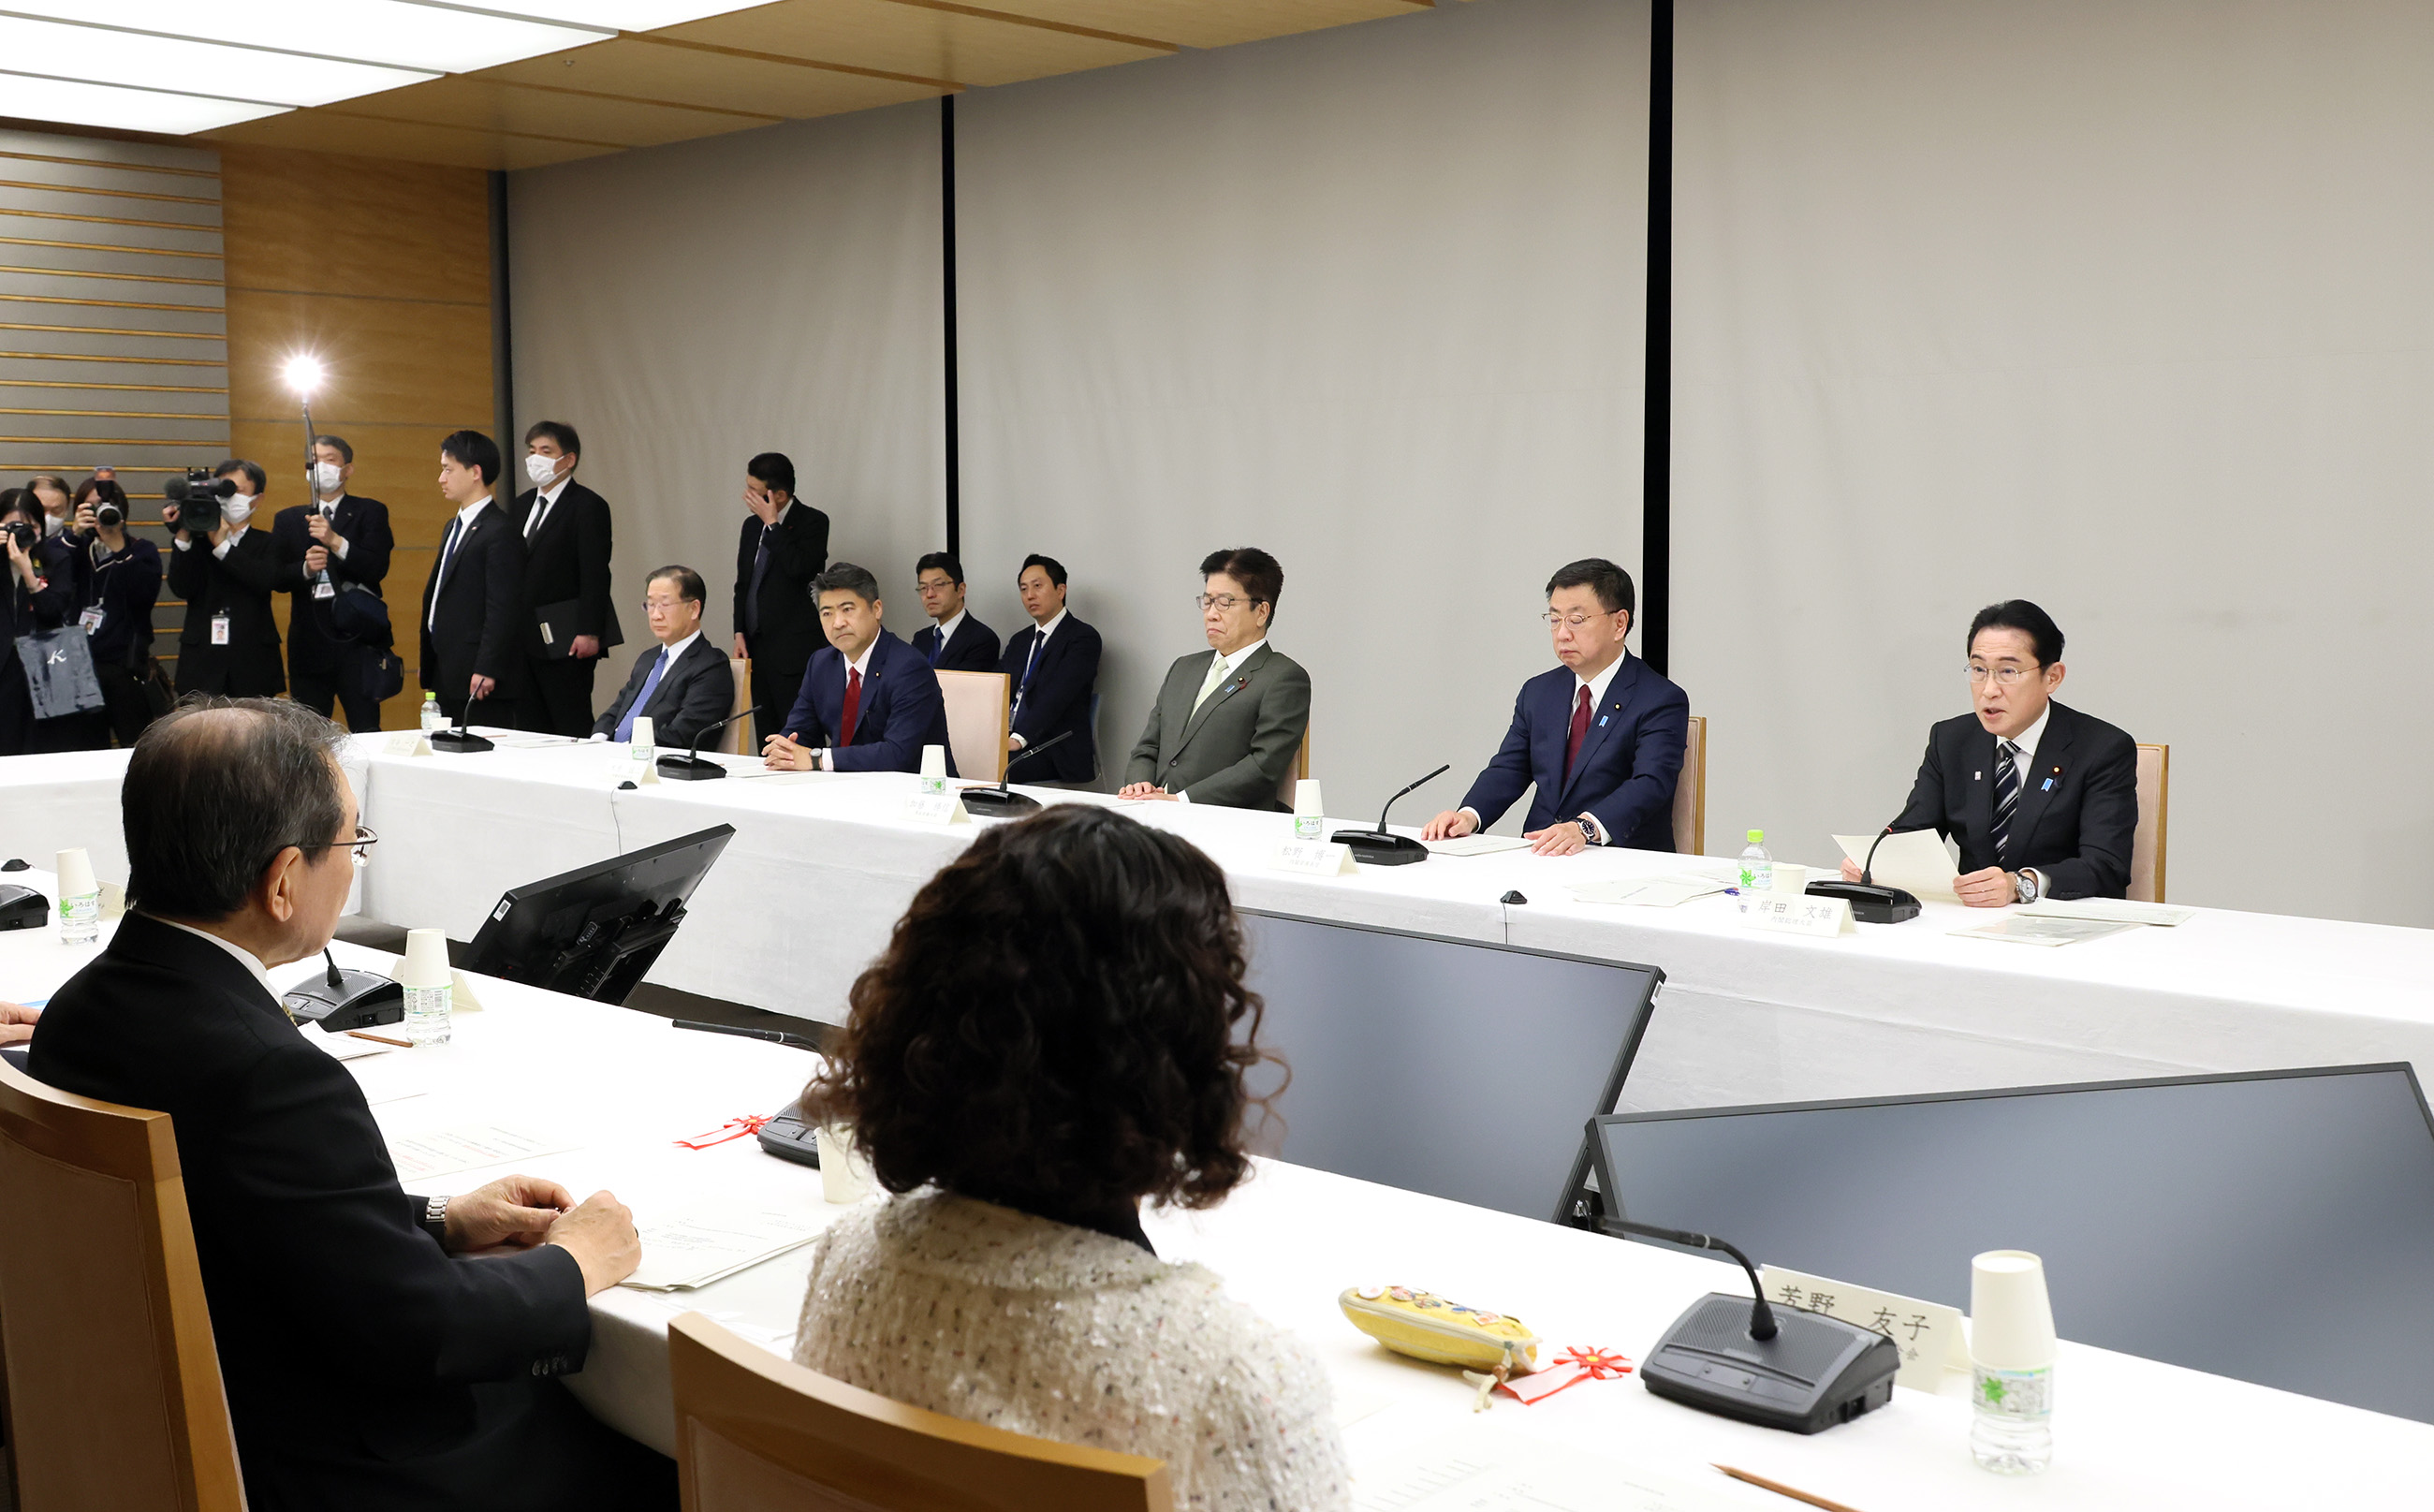 Prime Minister Kishida wrapping up a meeting (4)